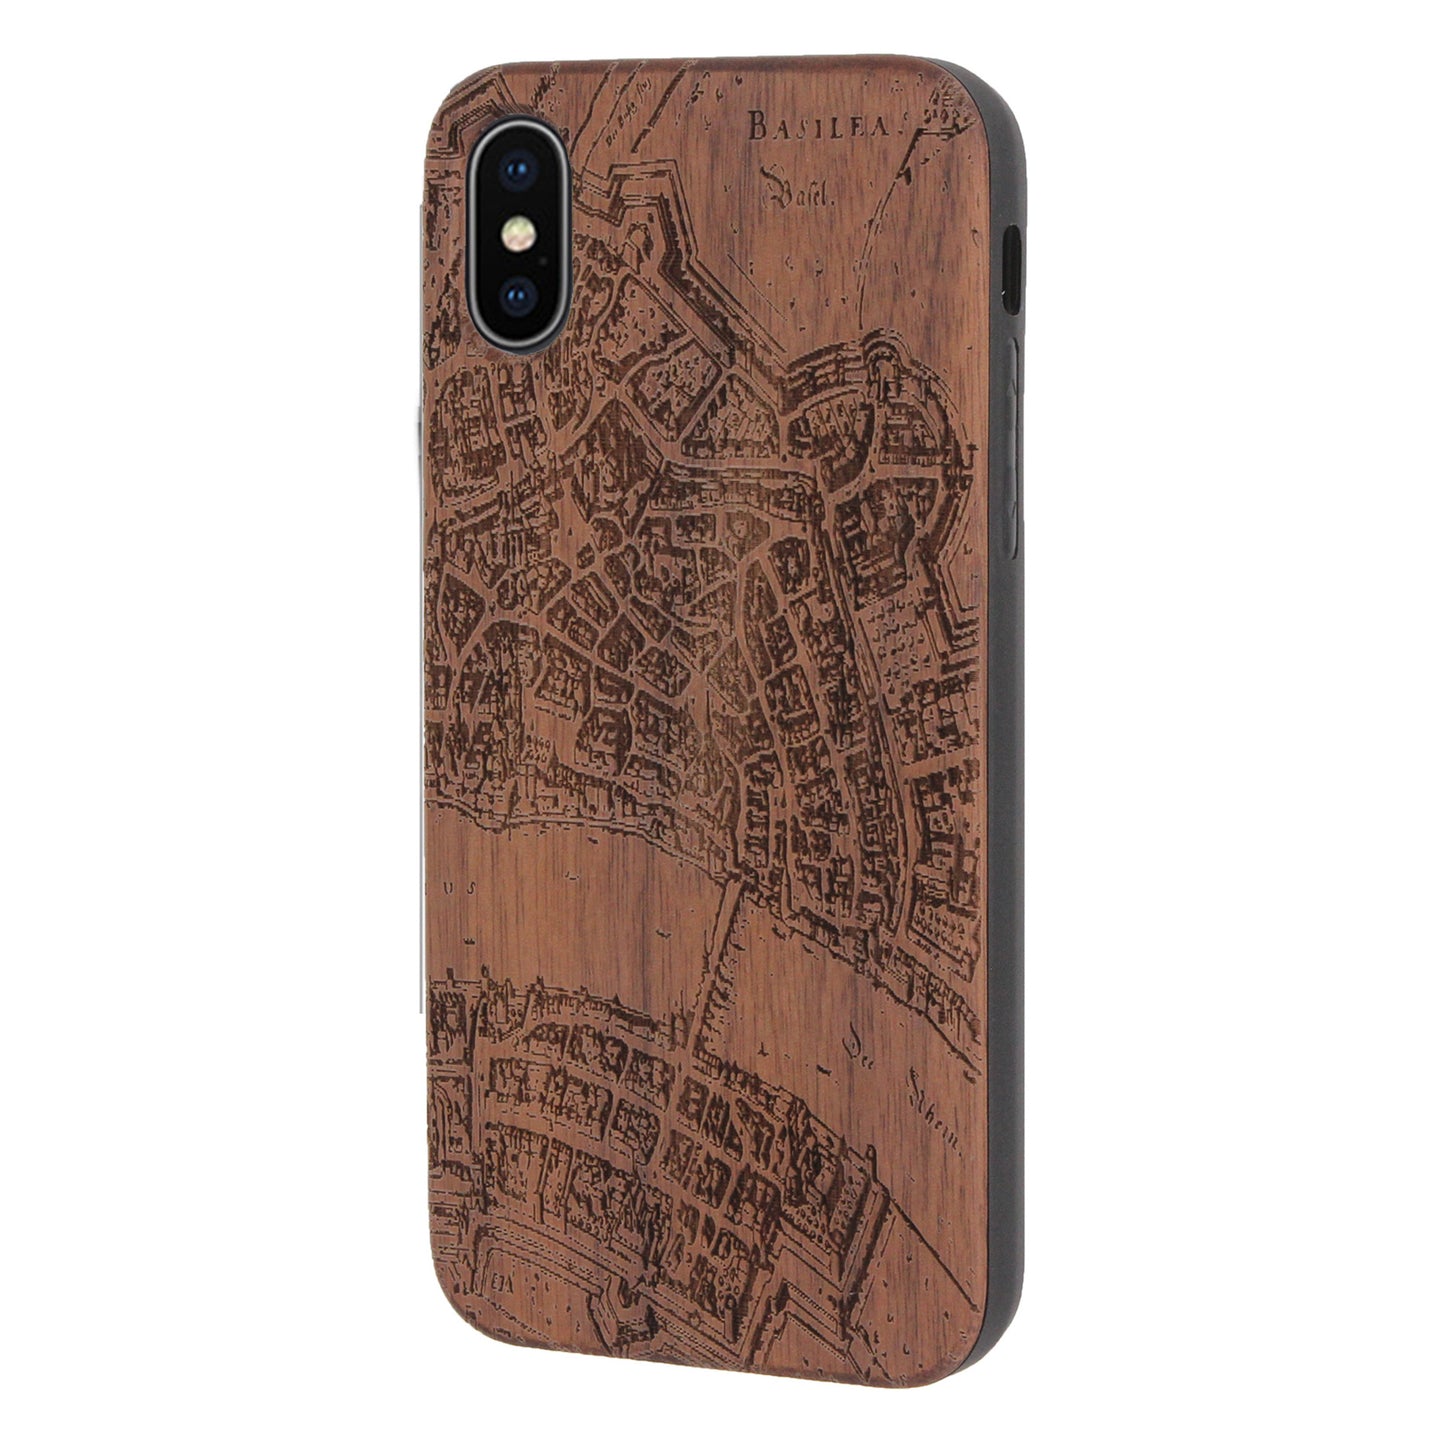 Basel Merian Eden case made of walnut wood for iPhone XS Max